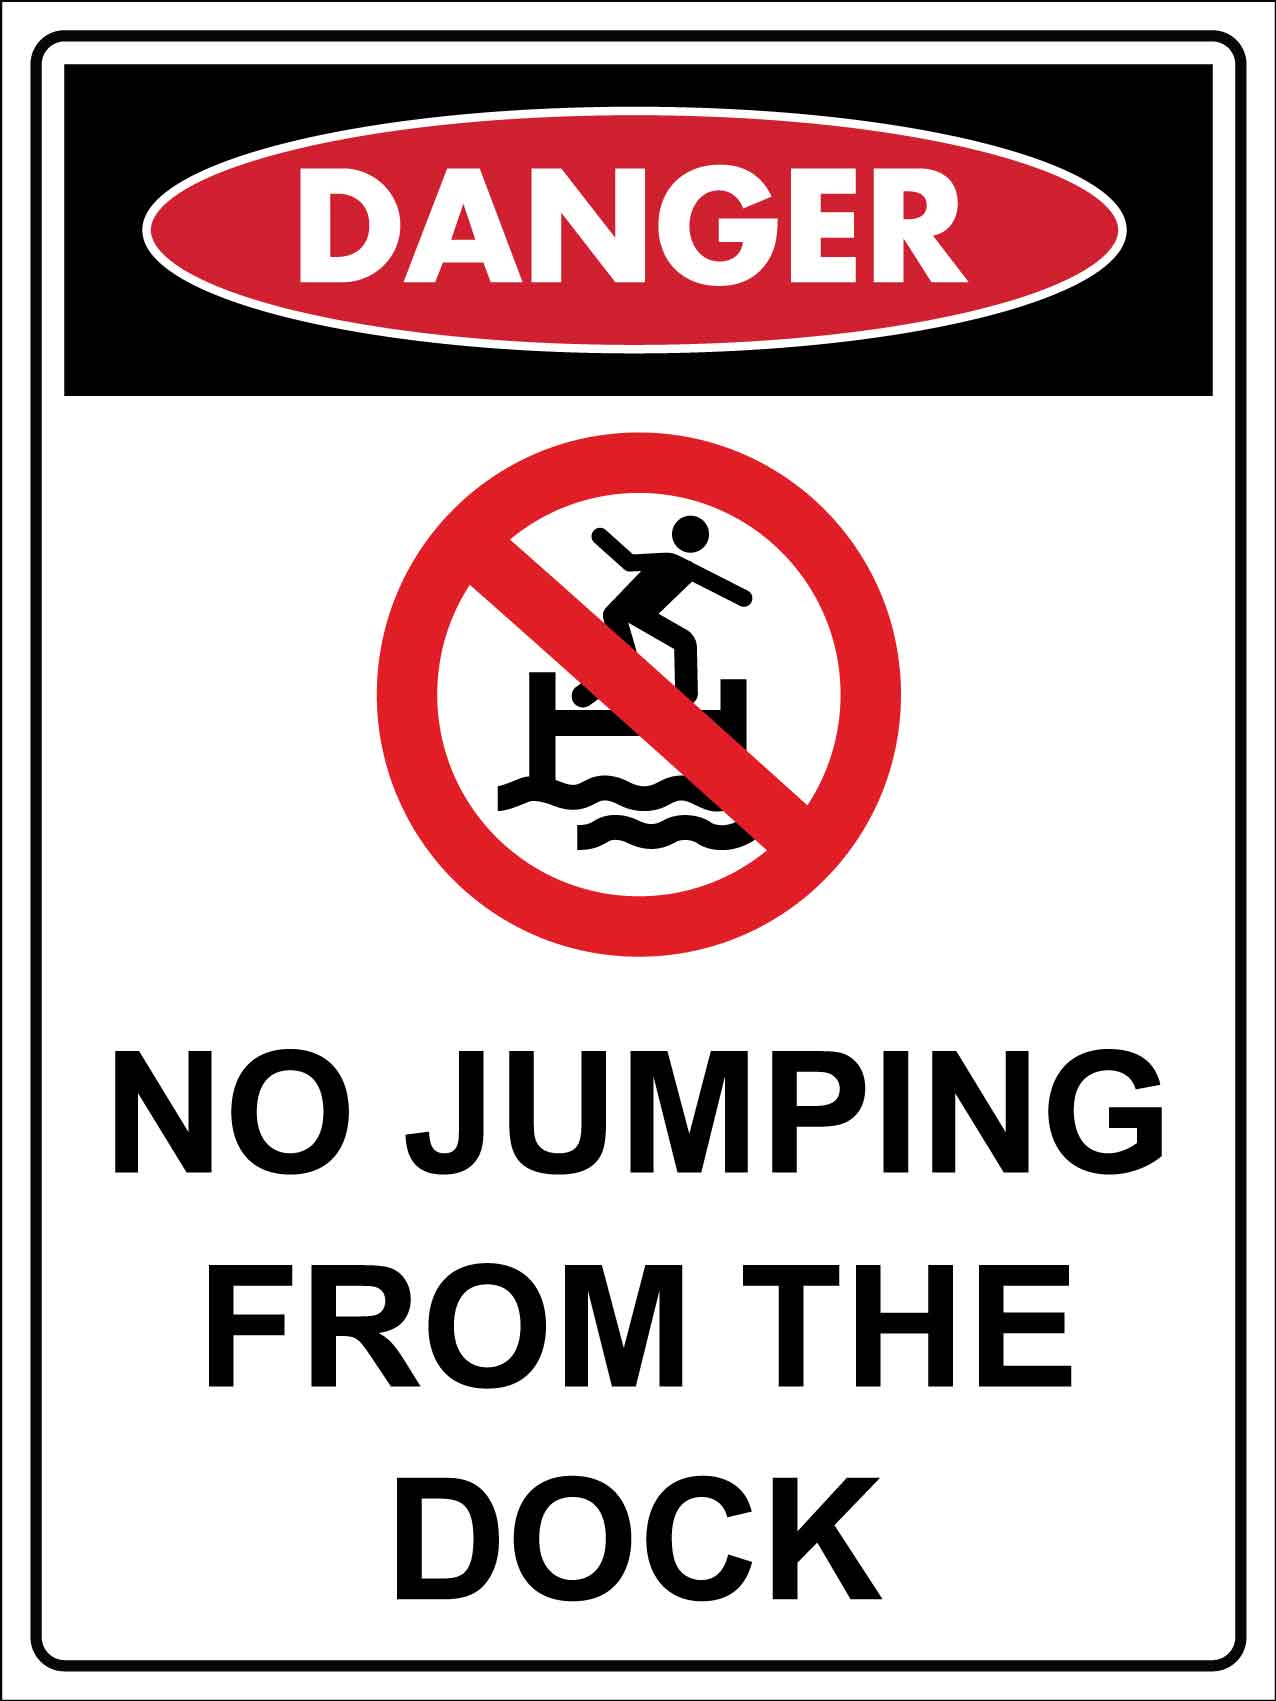 Danger No Jumping From the Dock Sign